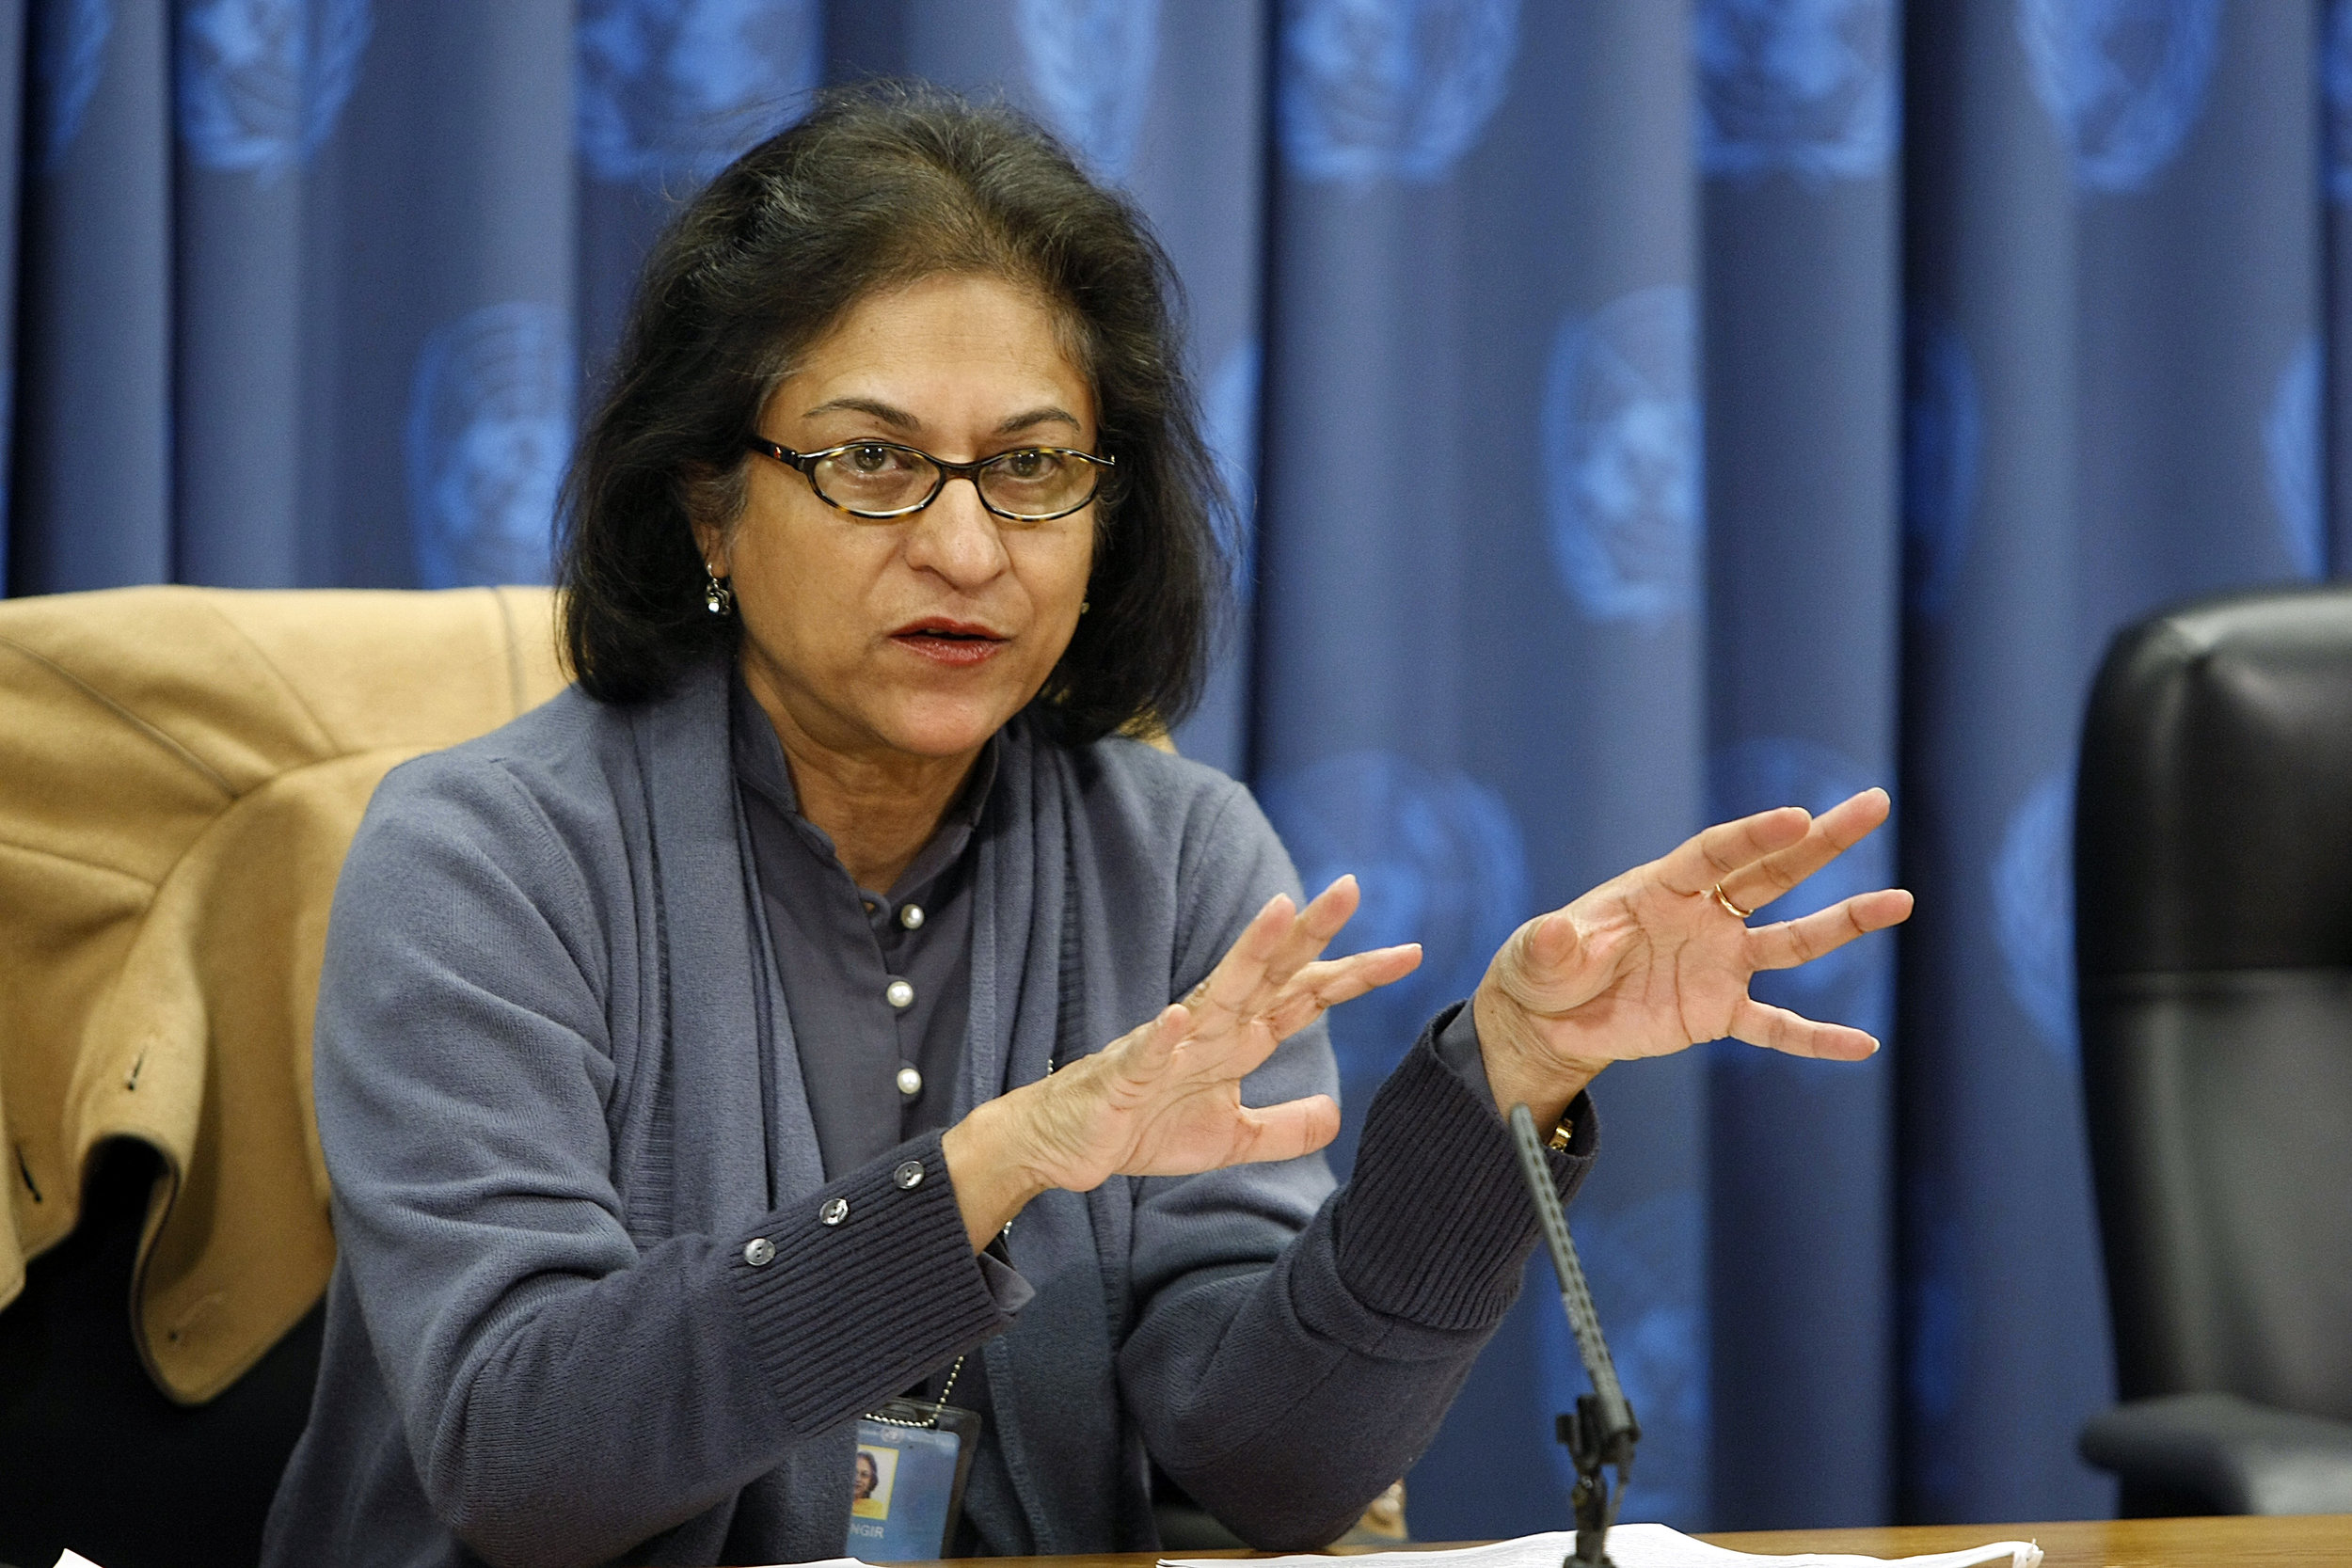 Asma Jahangir speaking to journalists in 2009 while serving as UN Special Rapporteur on freedom of religion or belief. Photo:&nbsp;UN Photo/Paulo Filgueiras